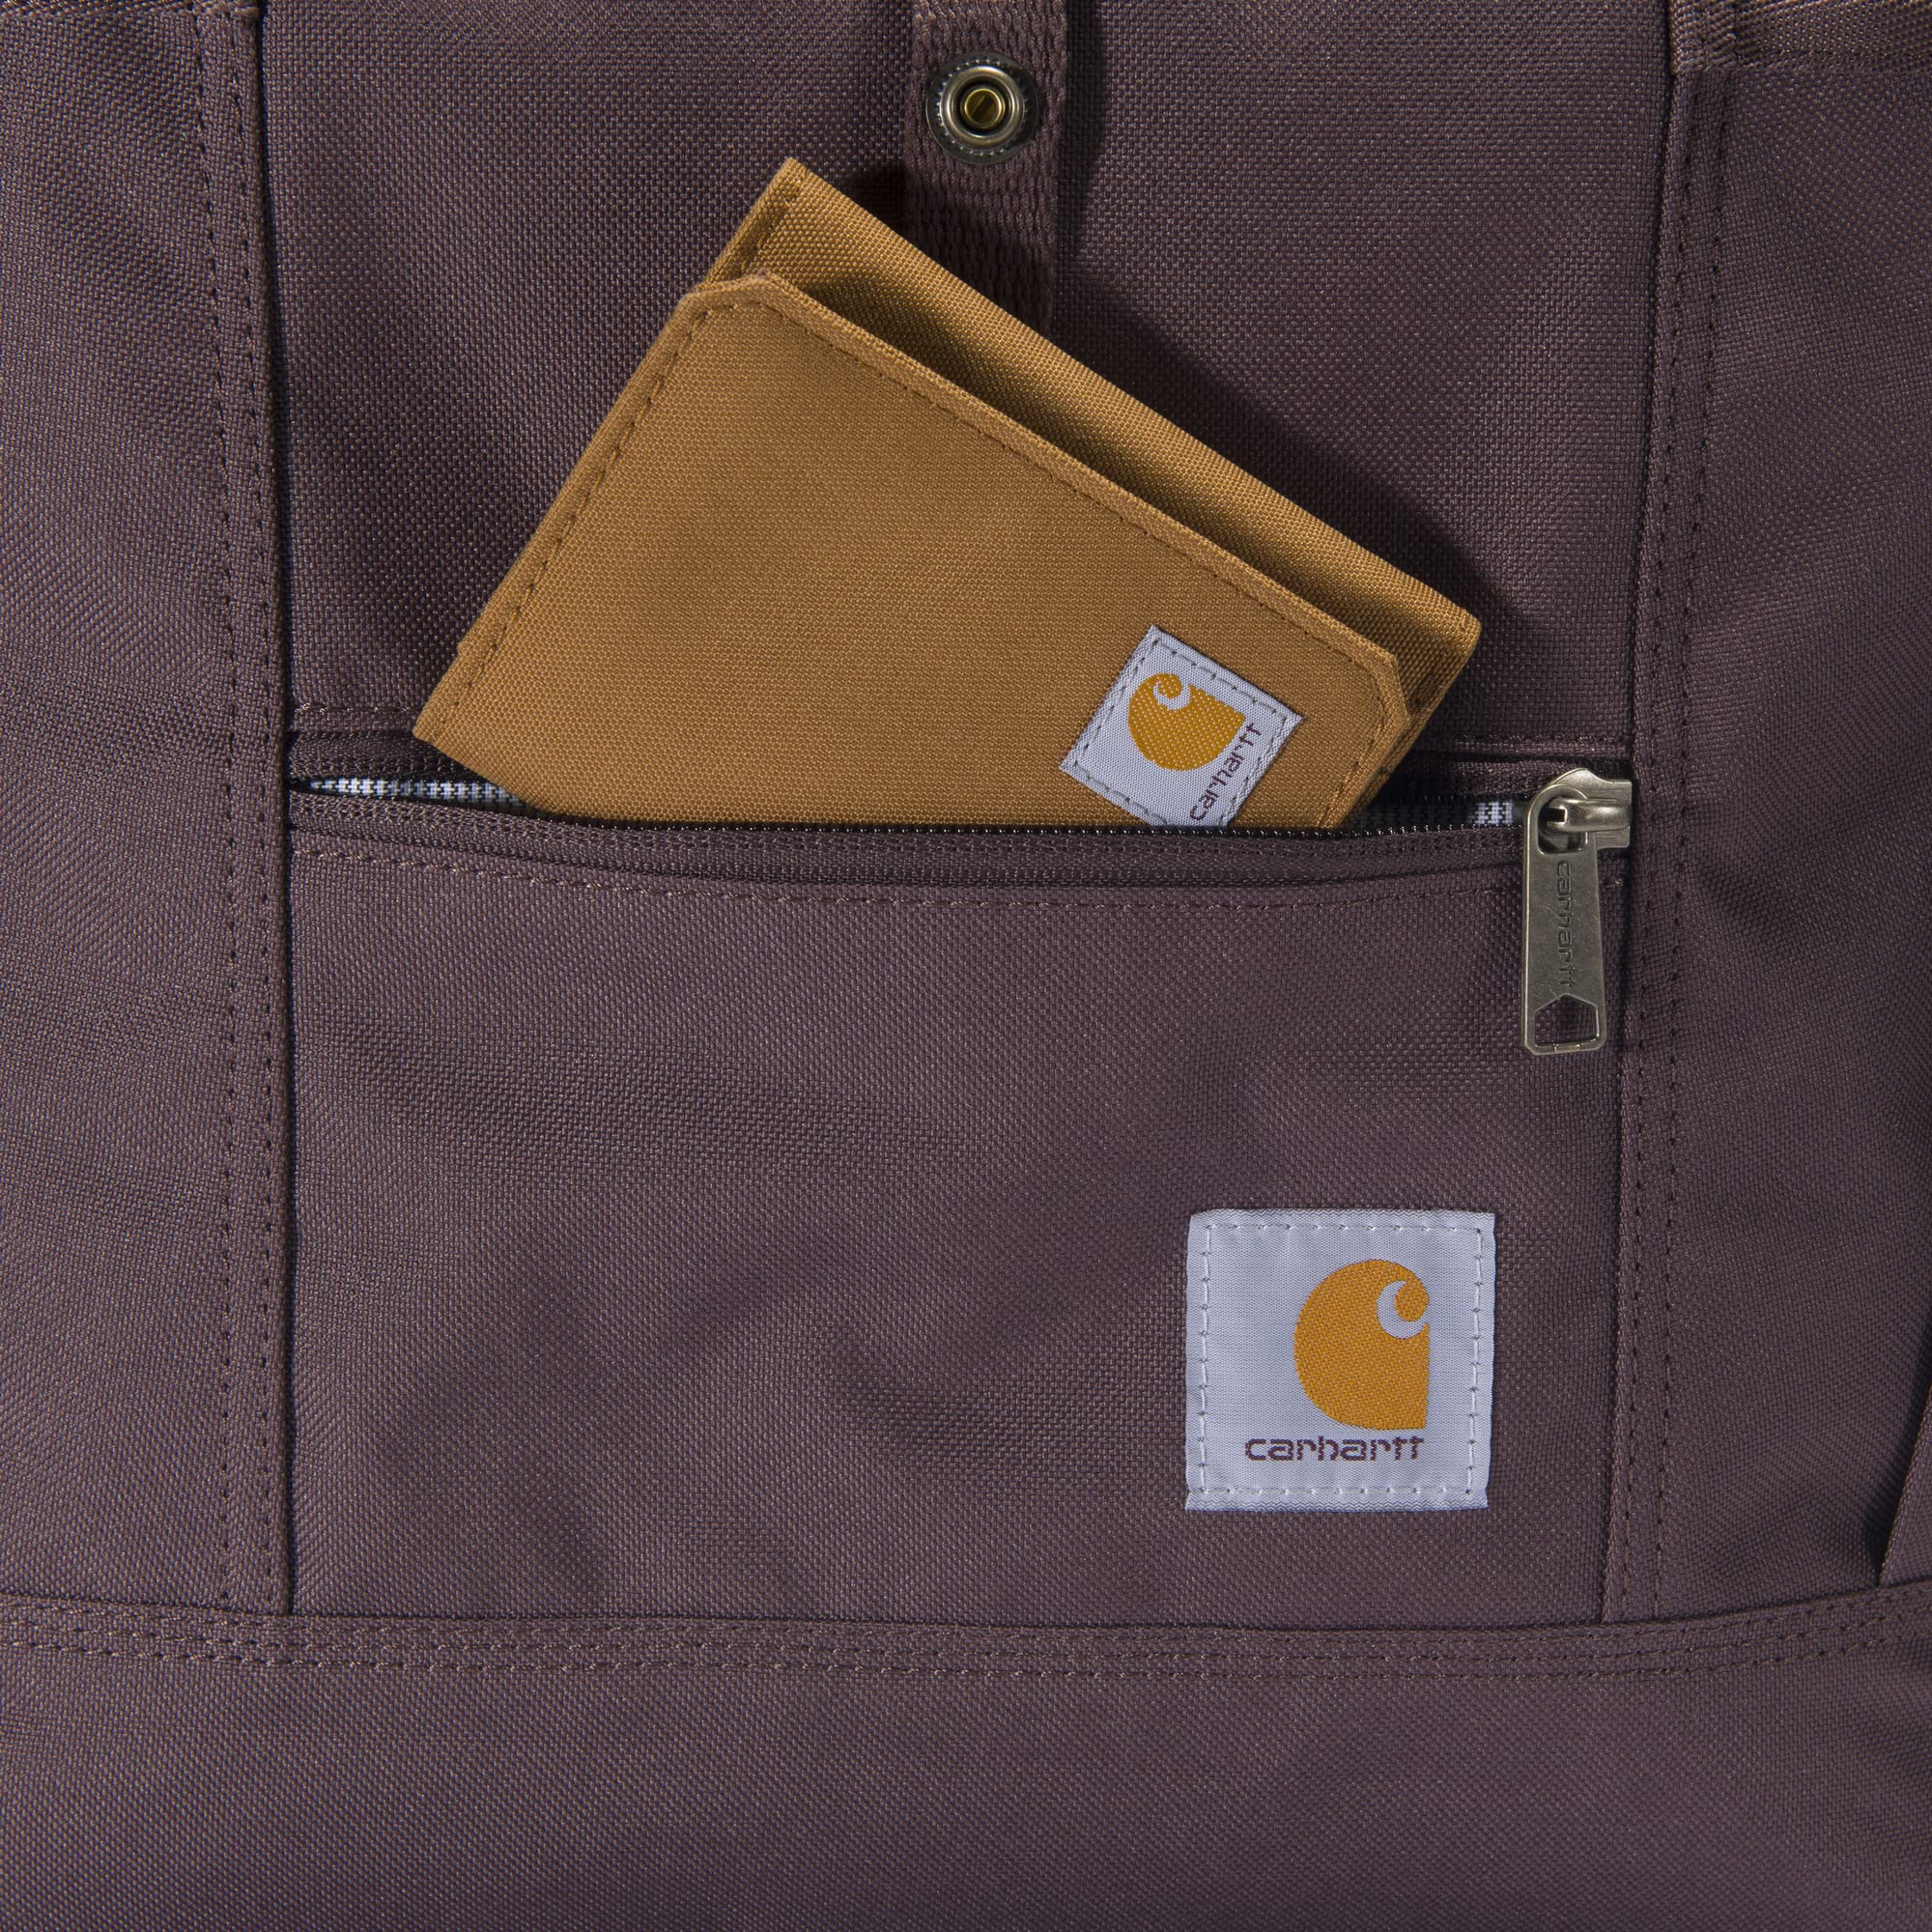 Carhartt Convertible, Durable Tote Bag with Adjustable Backpack Straps and Laptop Sleeve, Wine, One Size